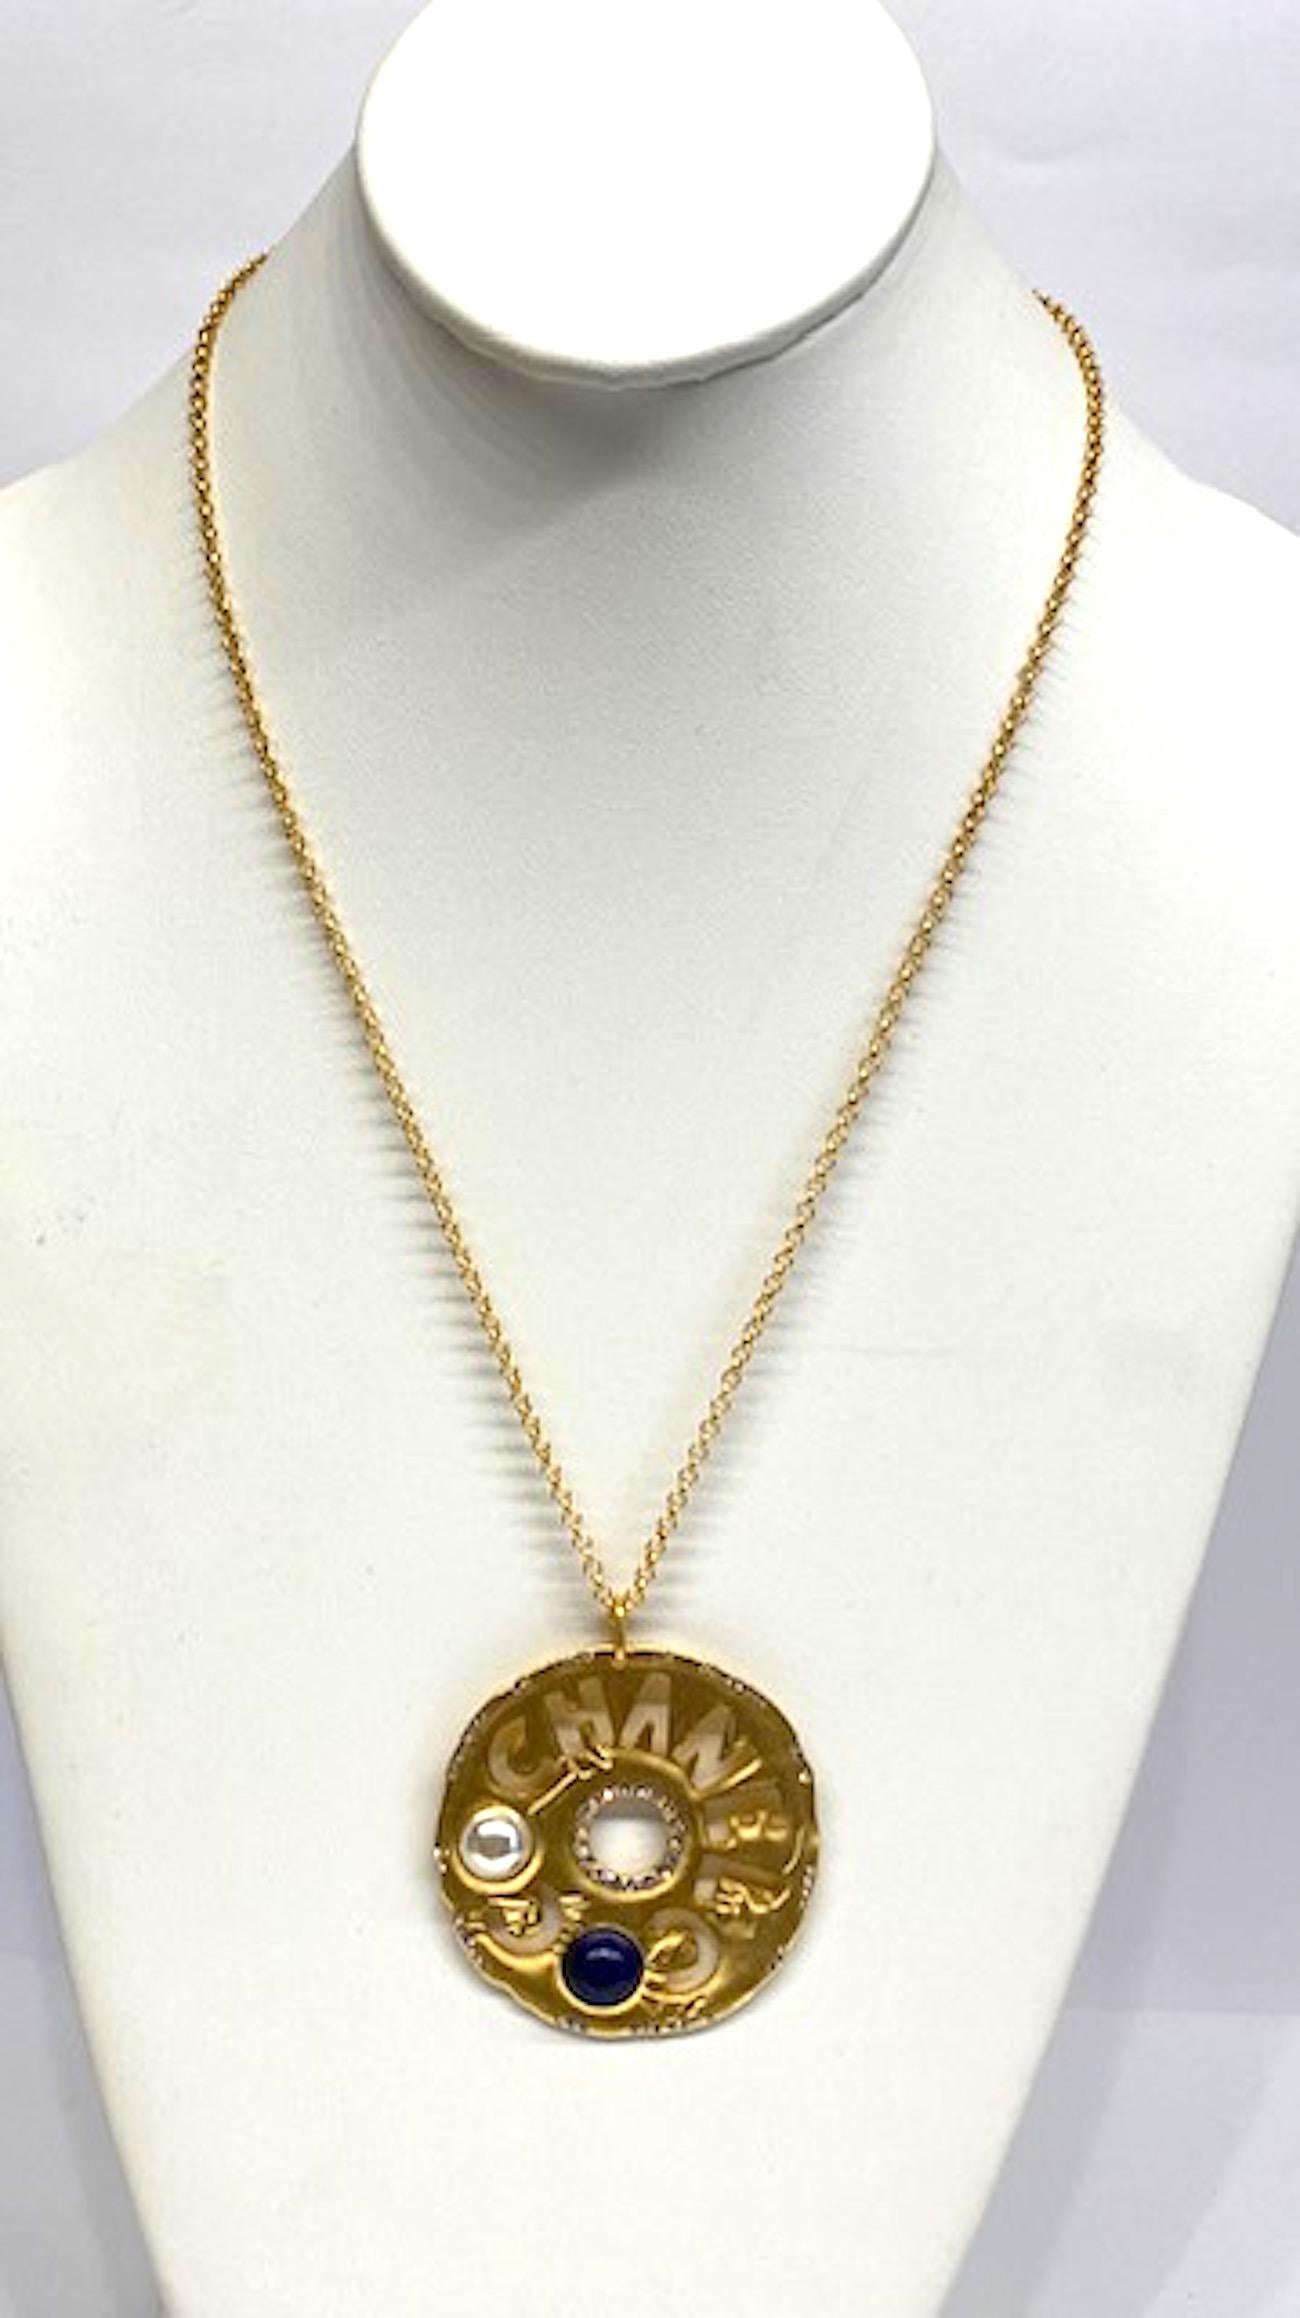 Chanel satin gold cut out pendant necklace from 2019 cruise collection. Pendant and cable link chain are a satin gold tone. The pendant has the words Coco and Chanel cost out. The two Os are set with a faux pearl or a faux glass lapis cabochon. The